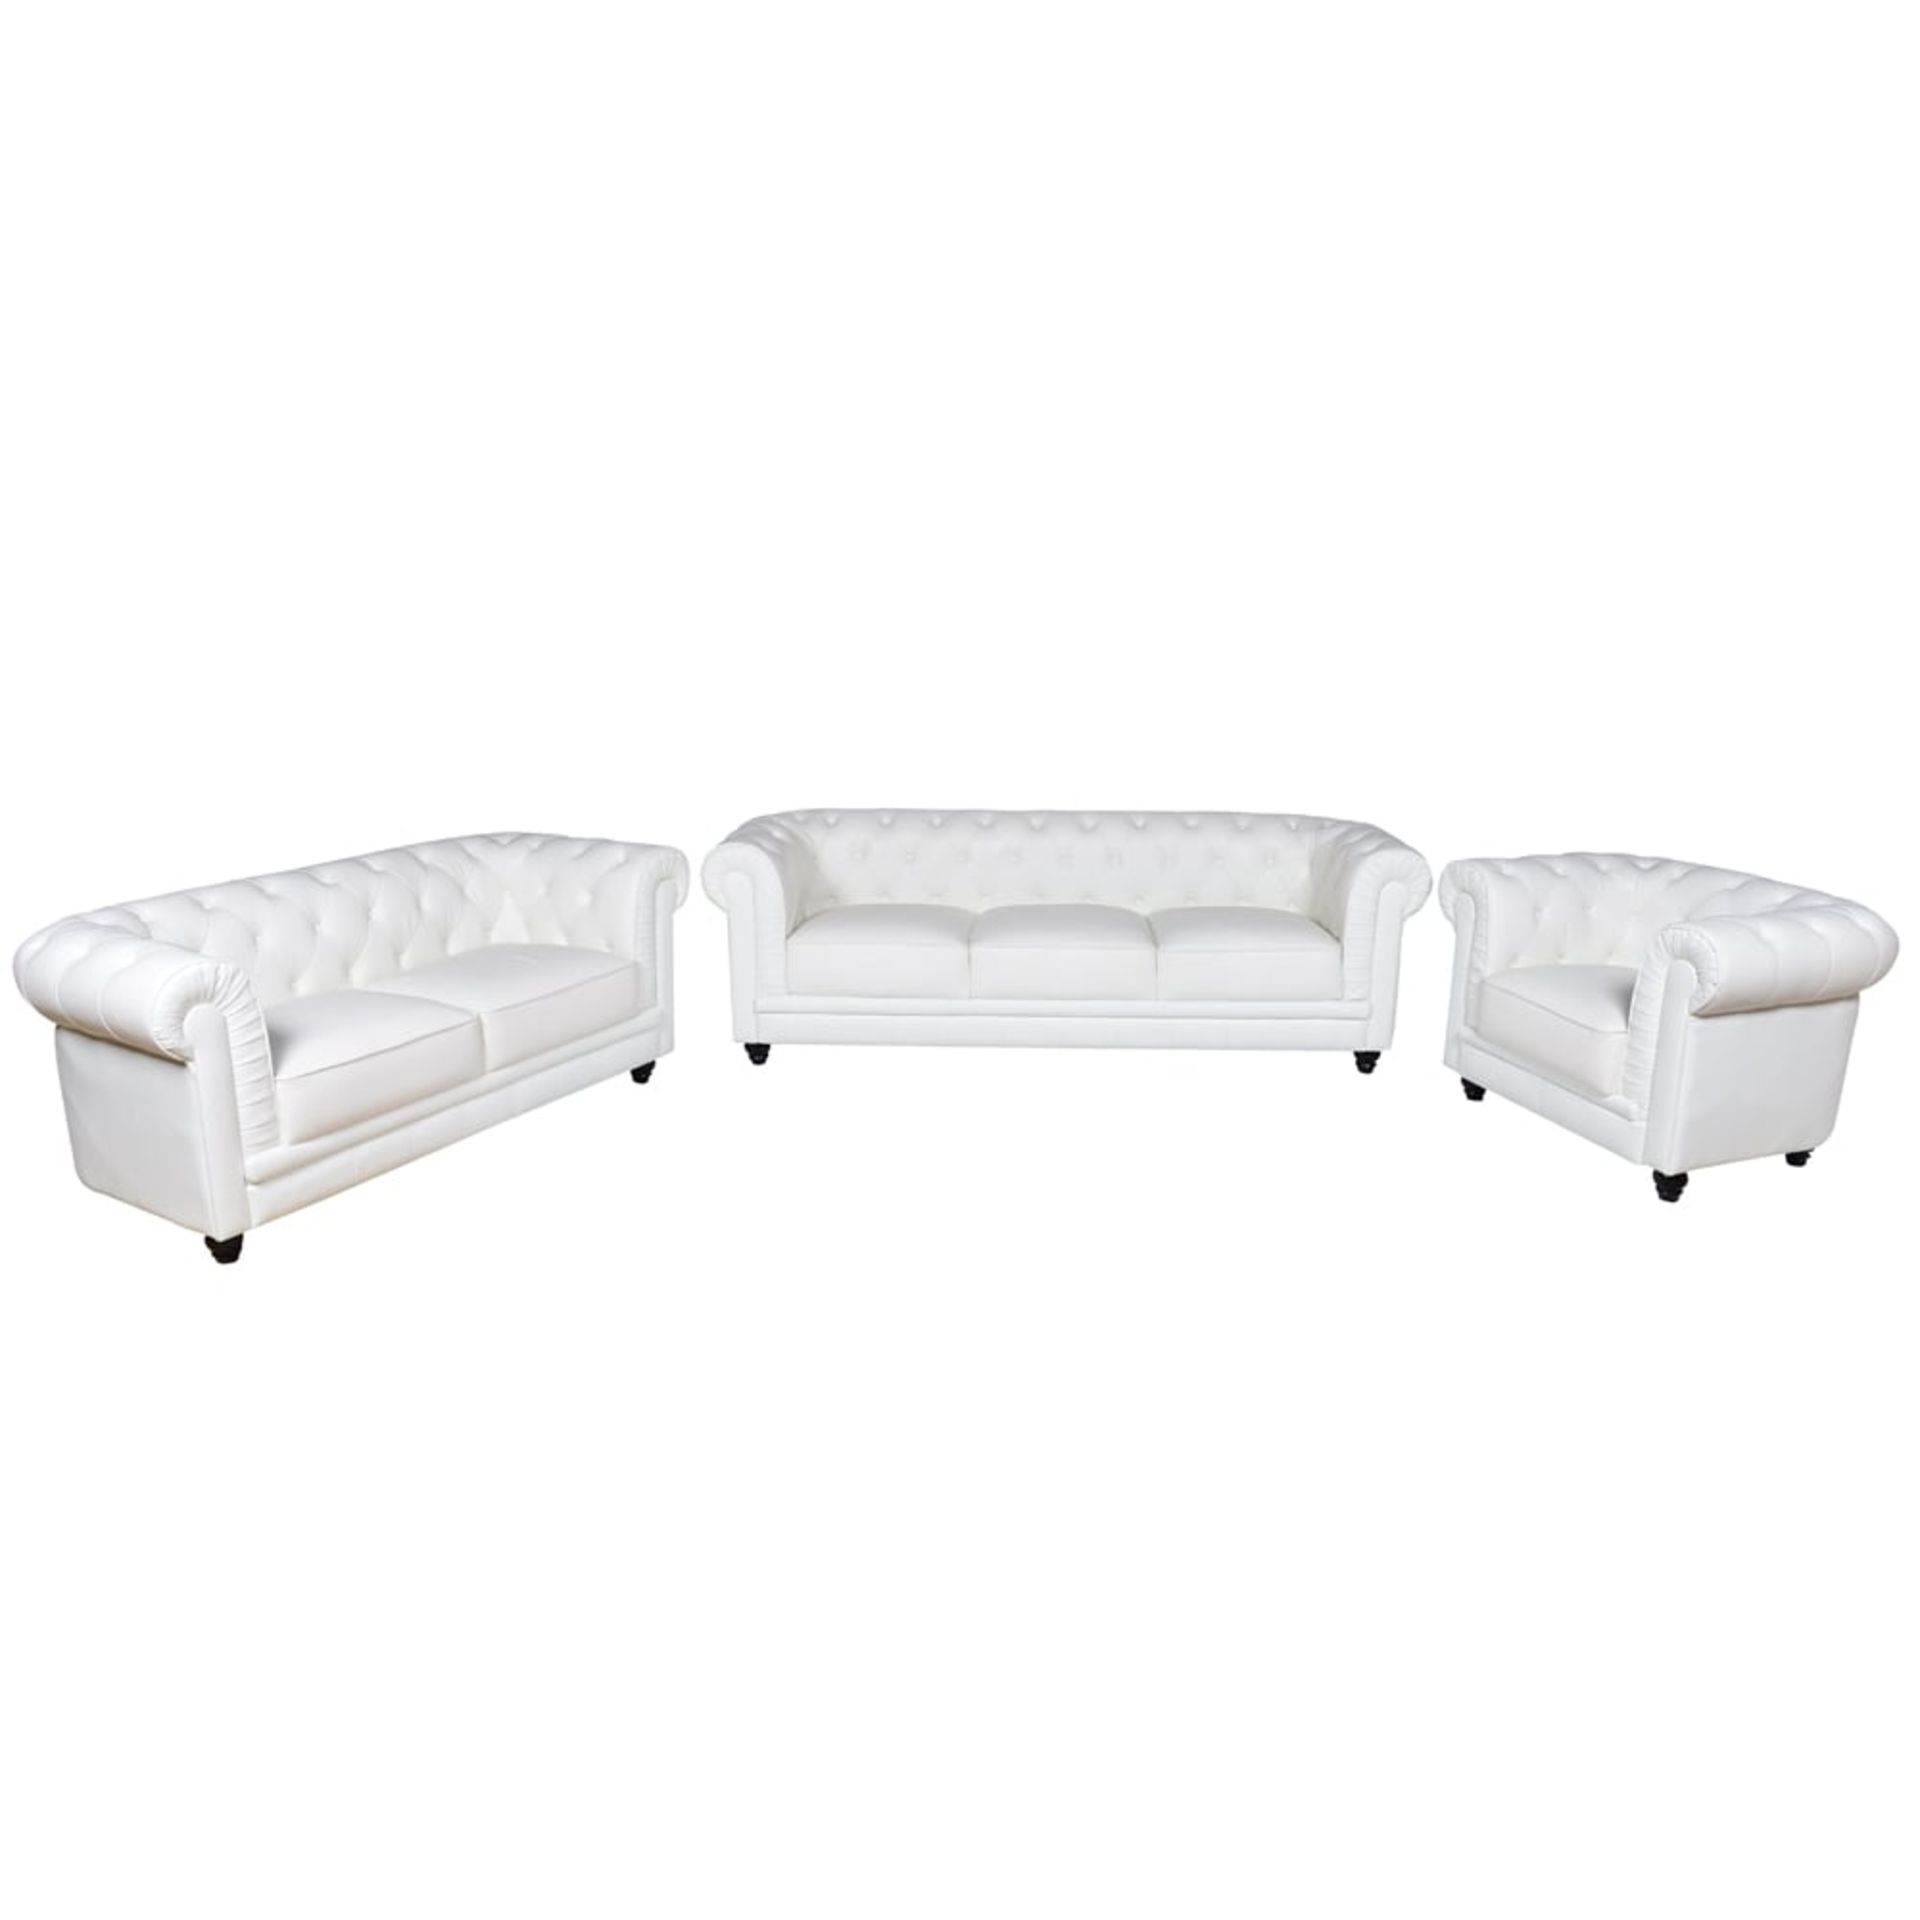 Empoli White Leather 3 Seater Sofa Handmade Chesterfield button back leather sofa in snow white. - Image 3 of 6